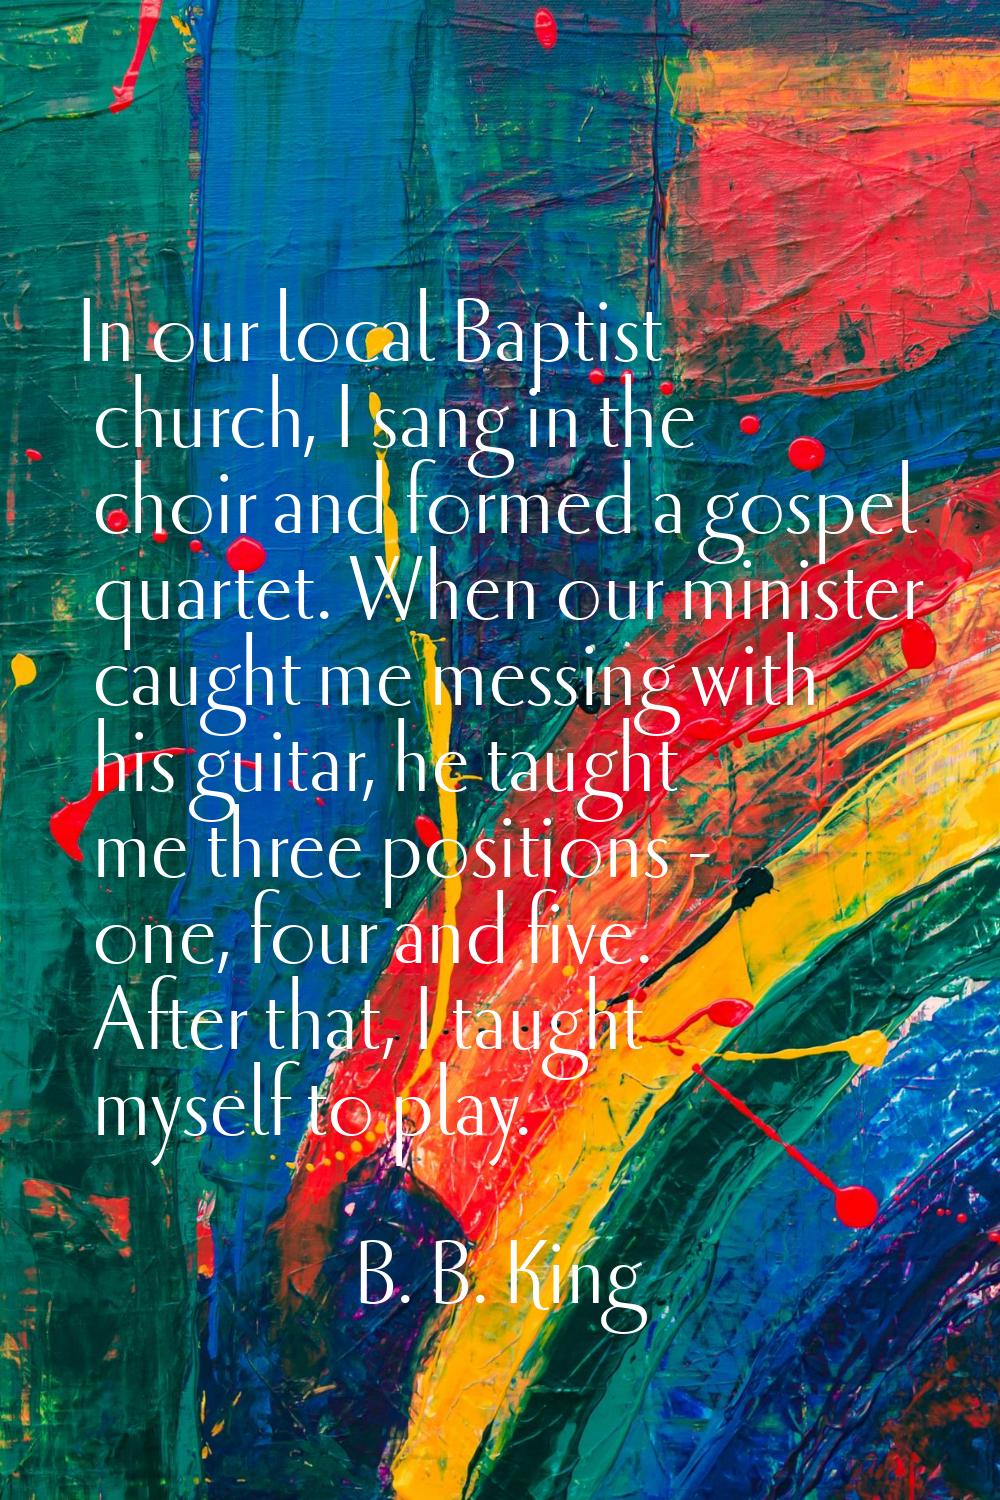 In our local Baptist church, I sang in the choir and formed a gospel quartet. When our minister cau